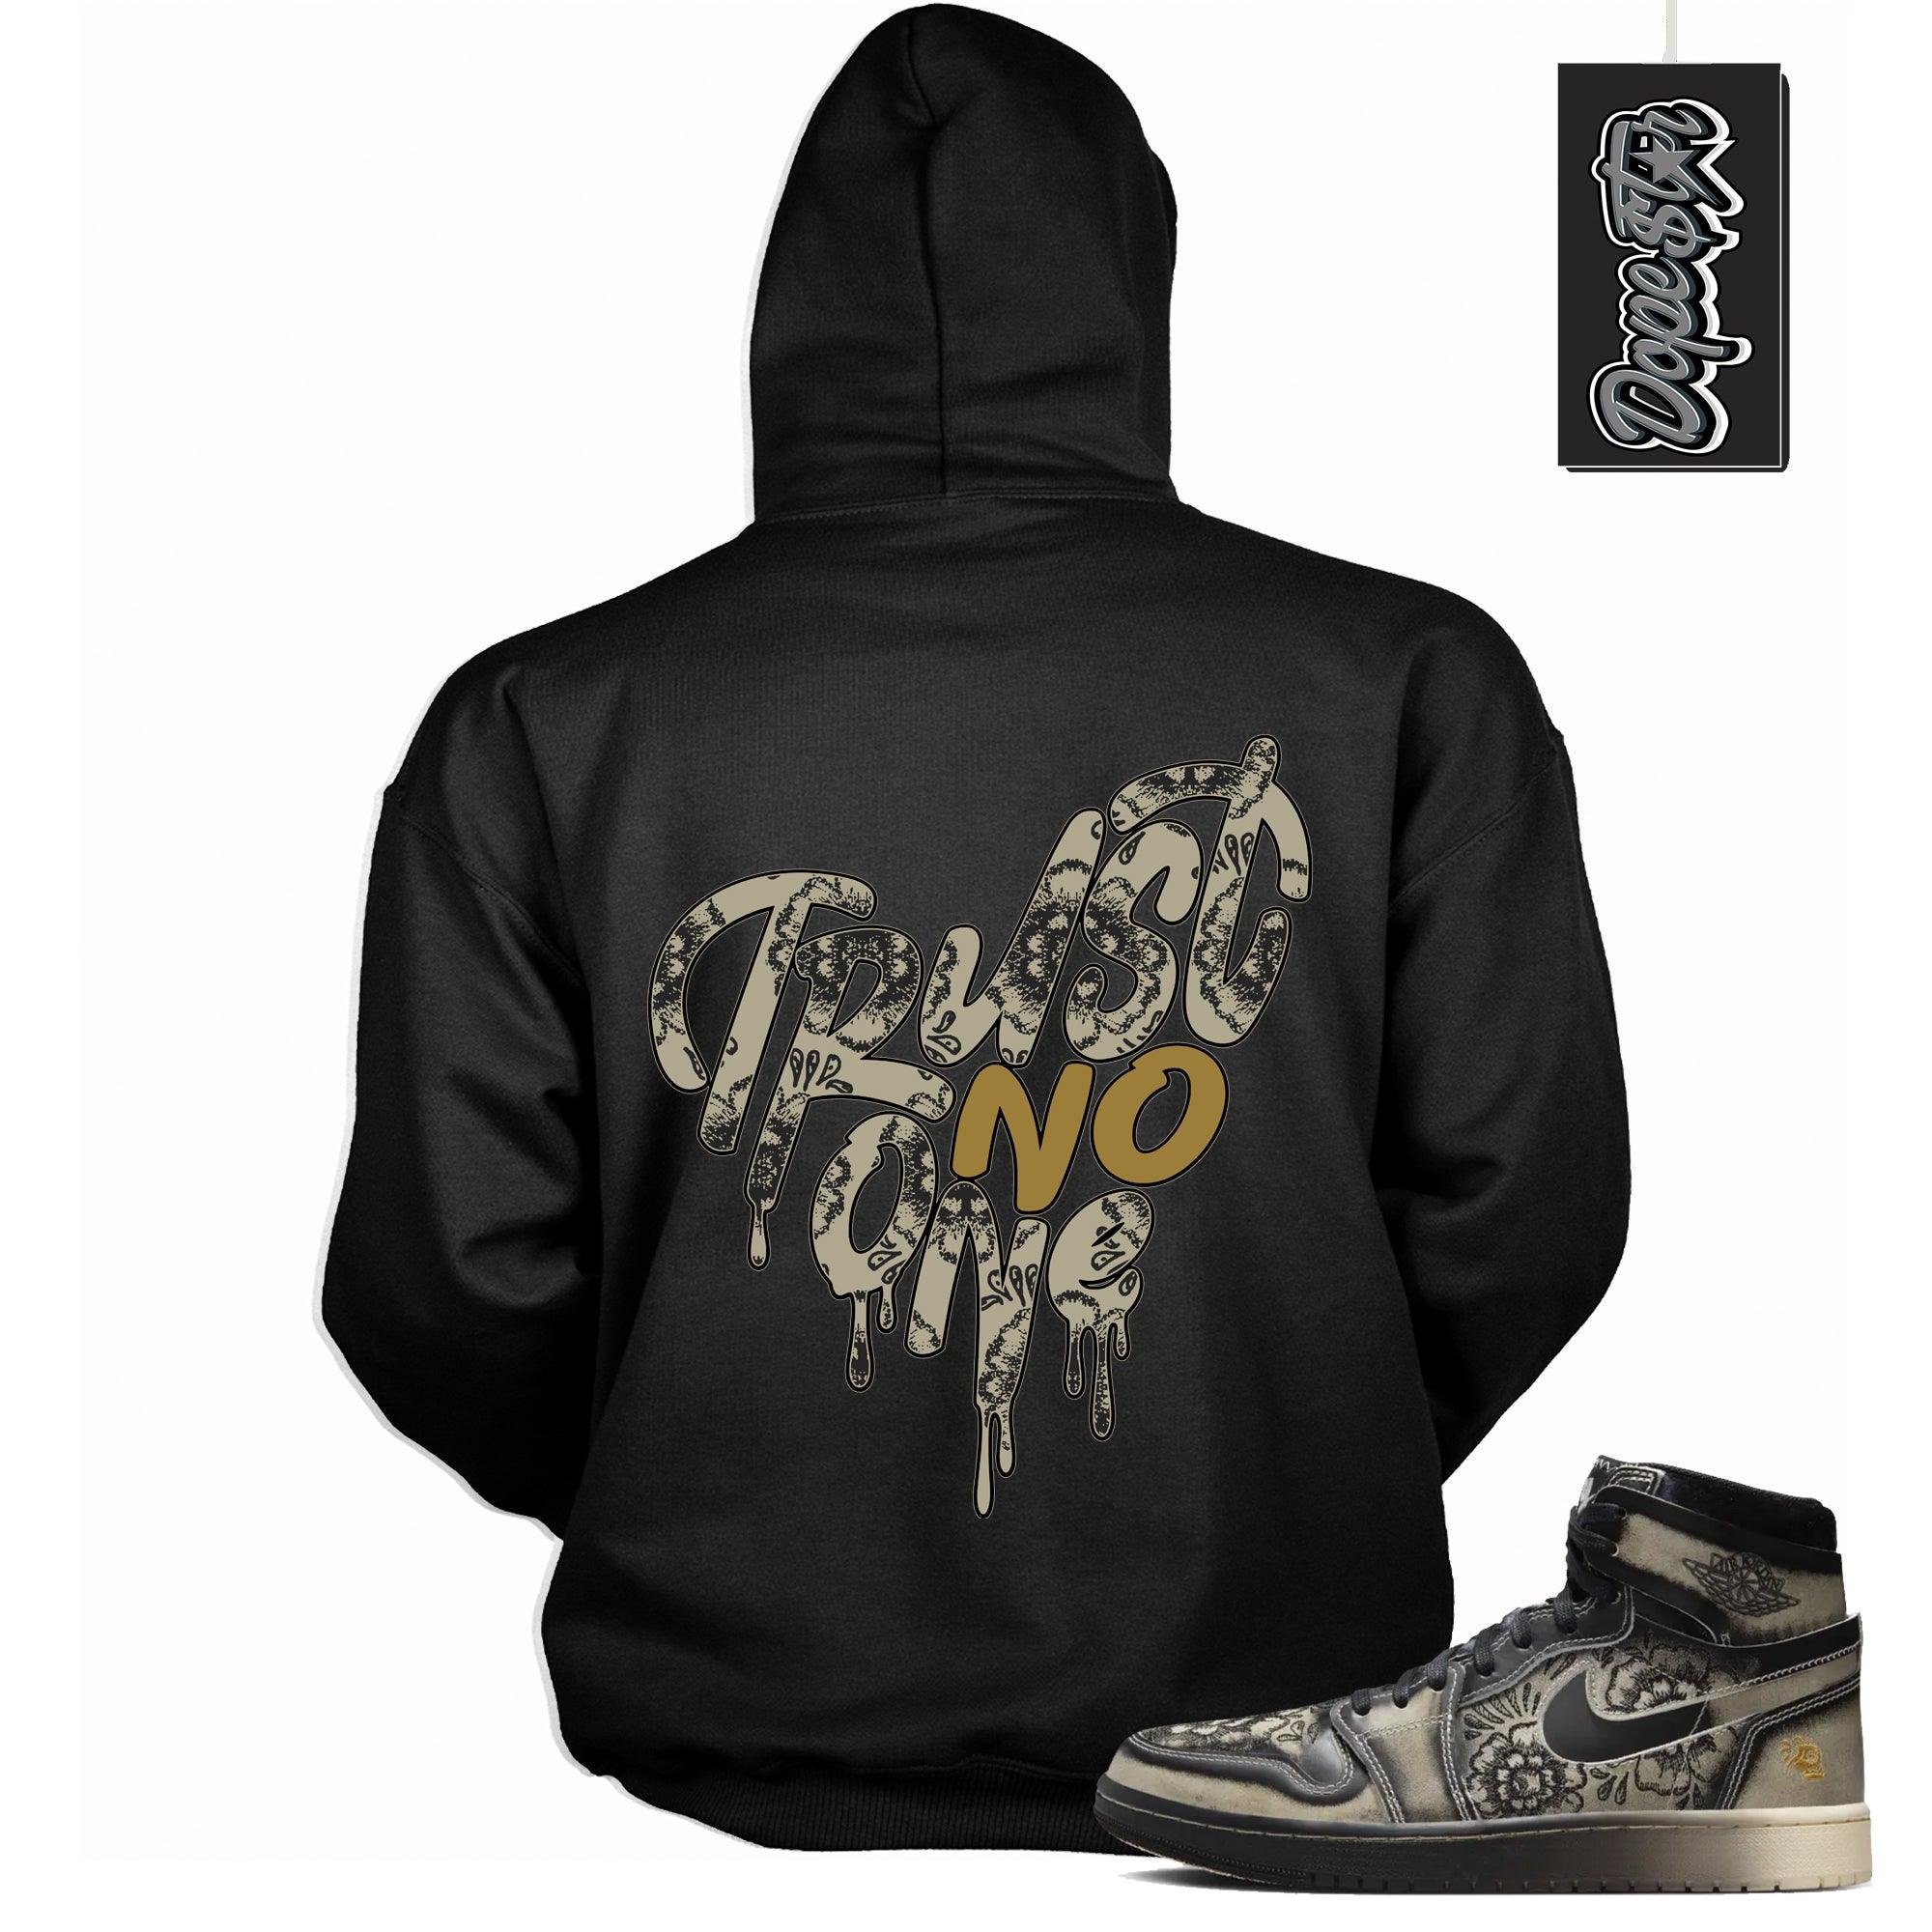 Cool Black Graphic Hoodie with “ Trust No One Heart “ print, that perfectly matches Air Jordan 1 High Zoom Comfort 2 Dia de Muertos Black and Pale Ivory sneakers